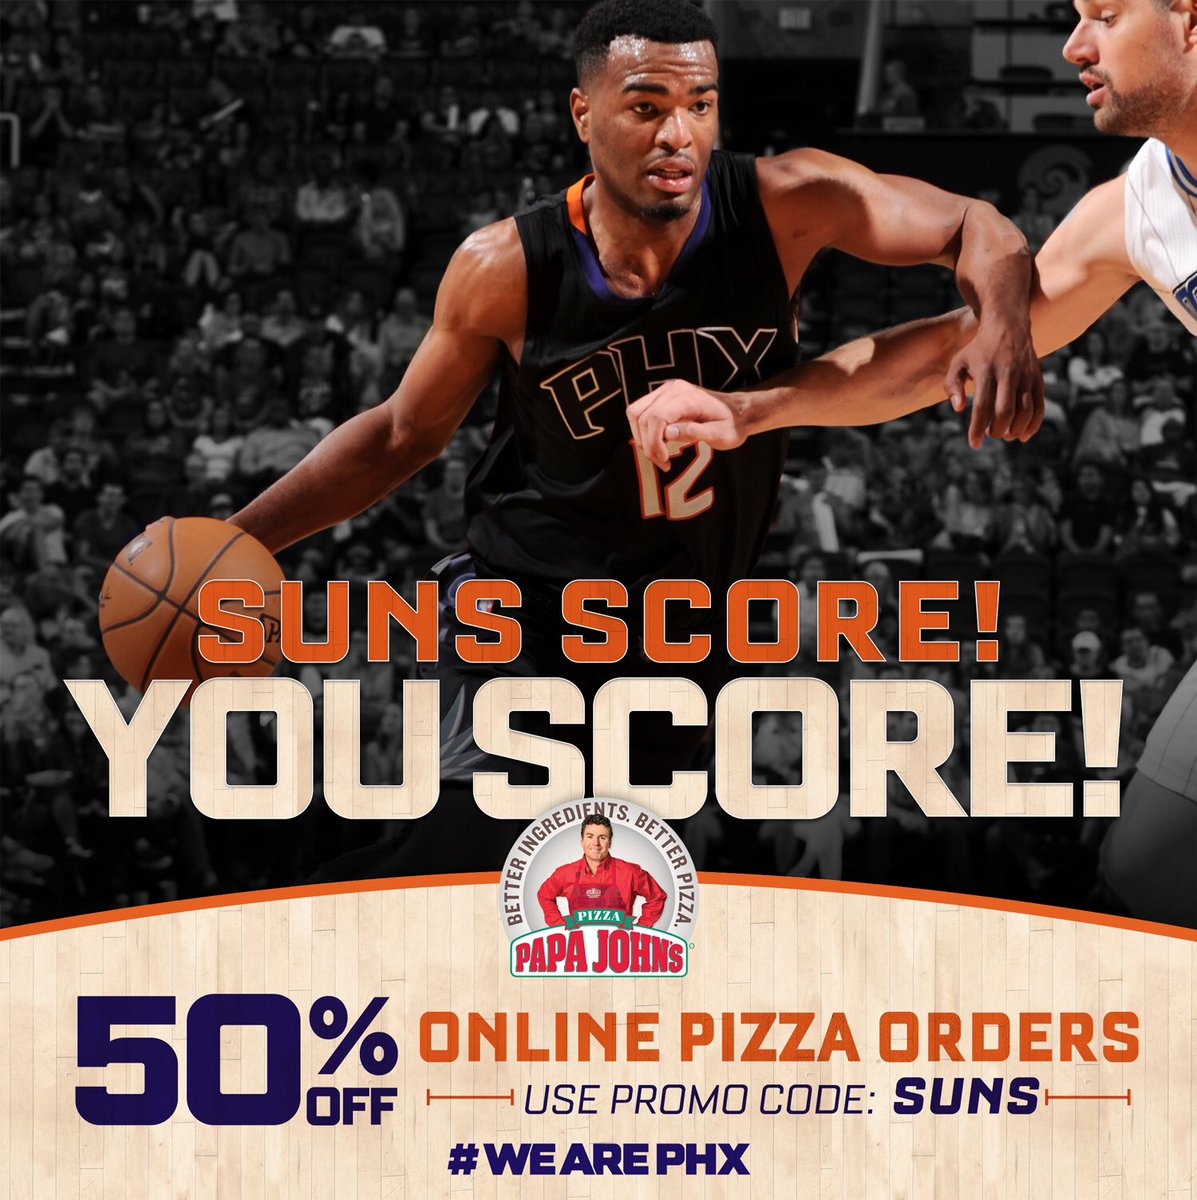 The Suns scored 90+ last night which earns you 50% off an online pizza order of @PapaJohnsPHX w/ code SUNS today! https://t.co/qJsWFmH8YS